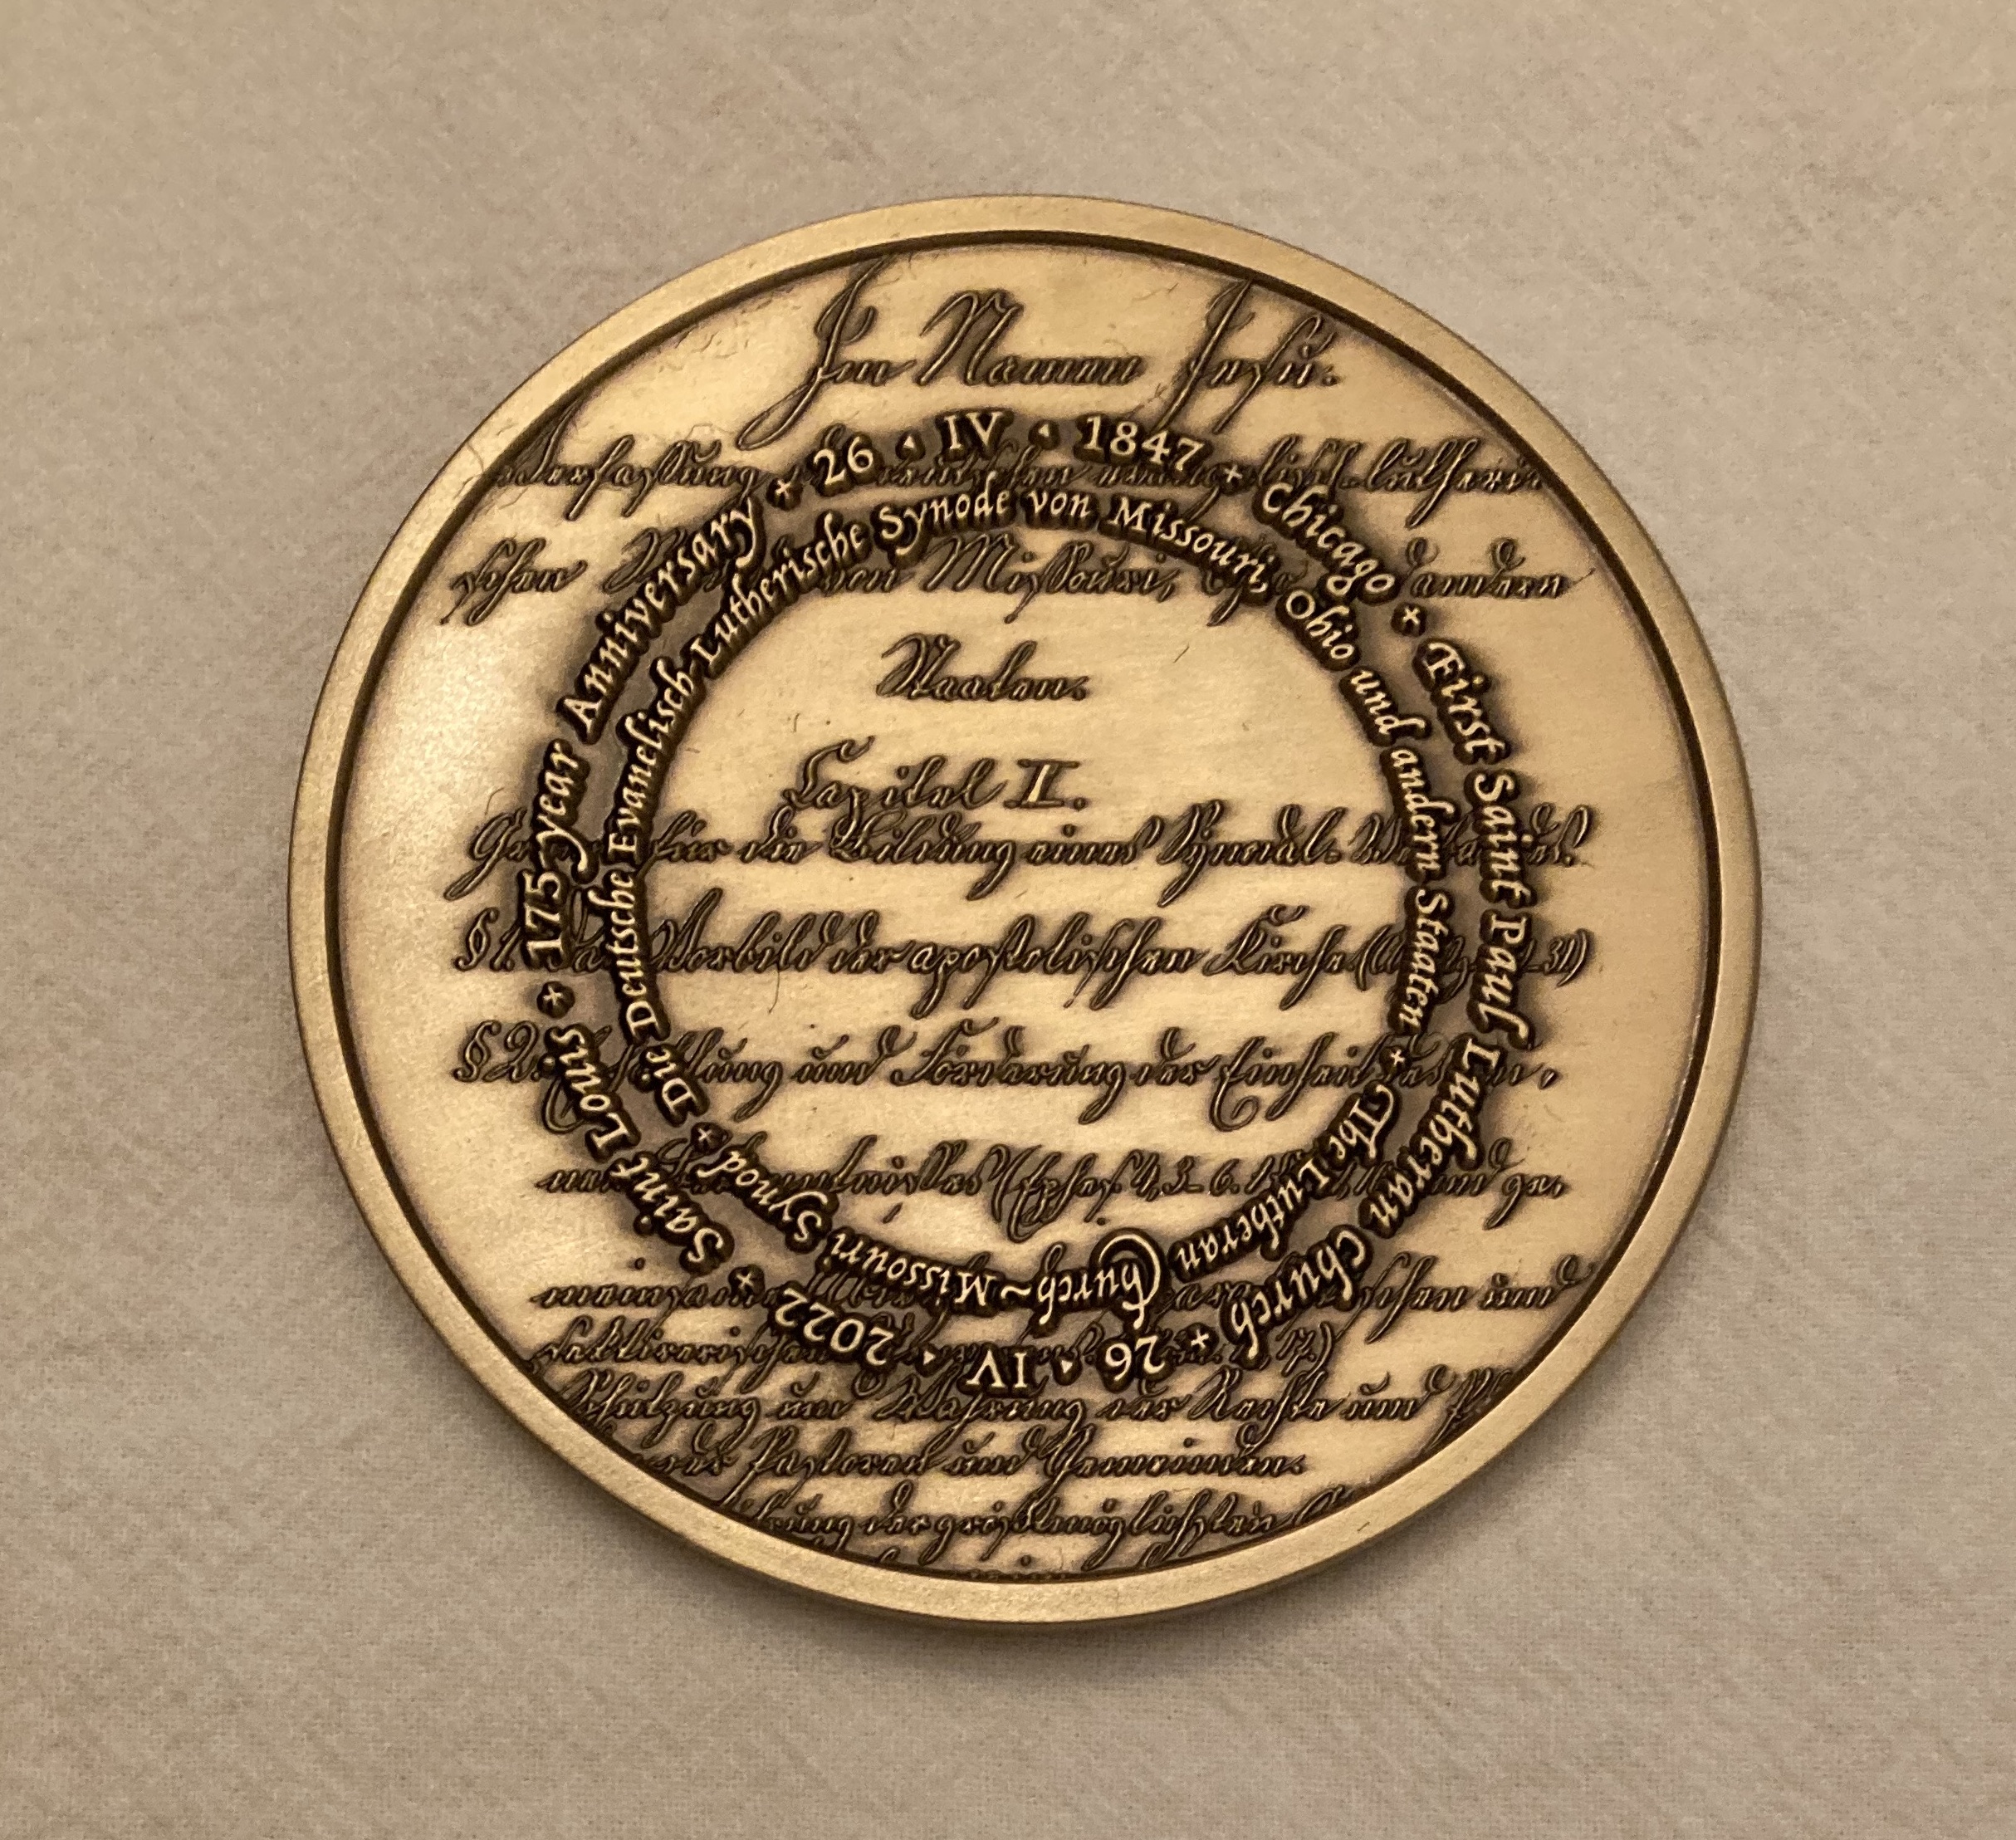 Reverse of the LCMS 175th Anniversary medal